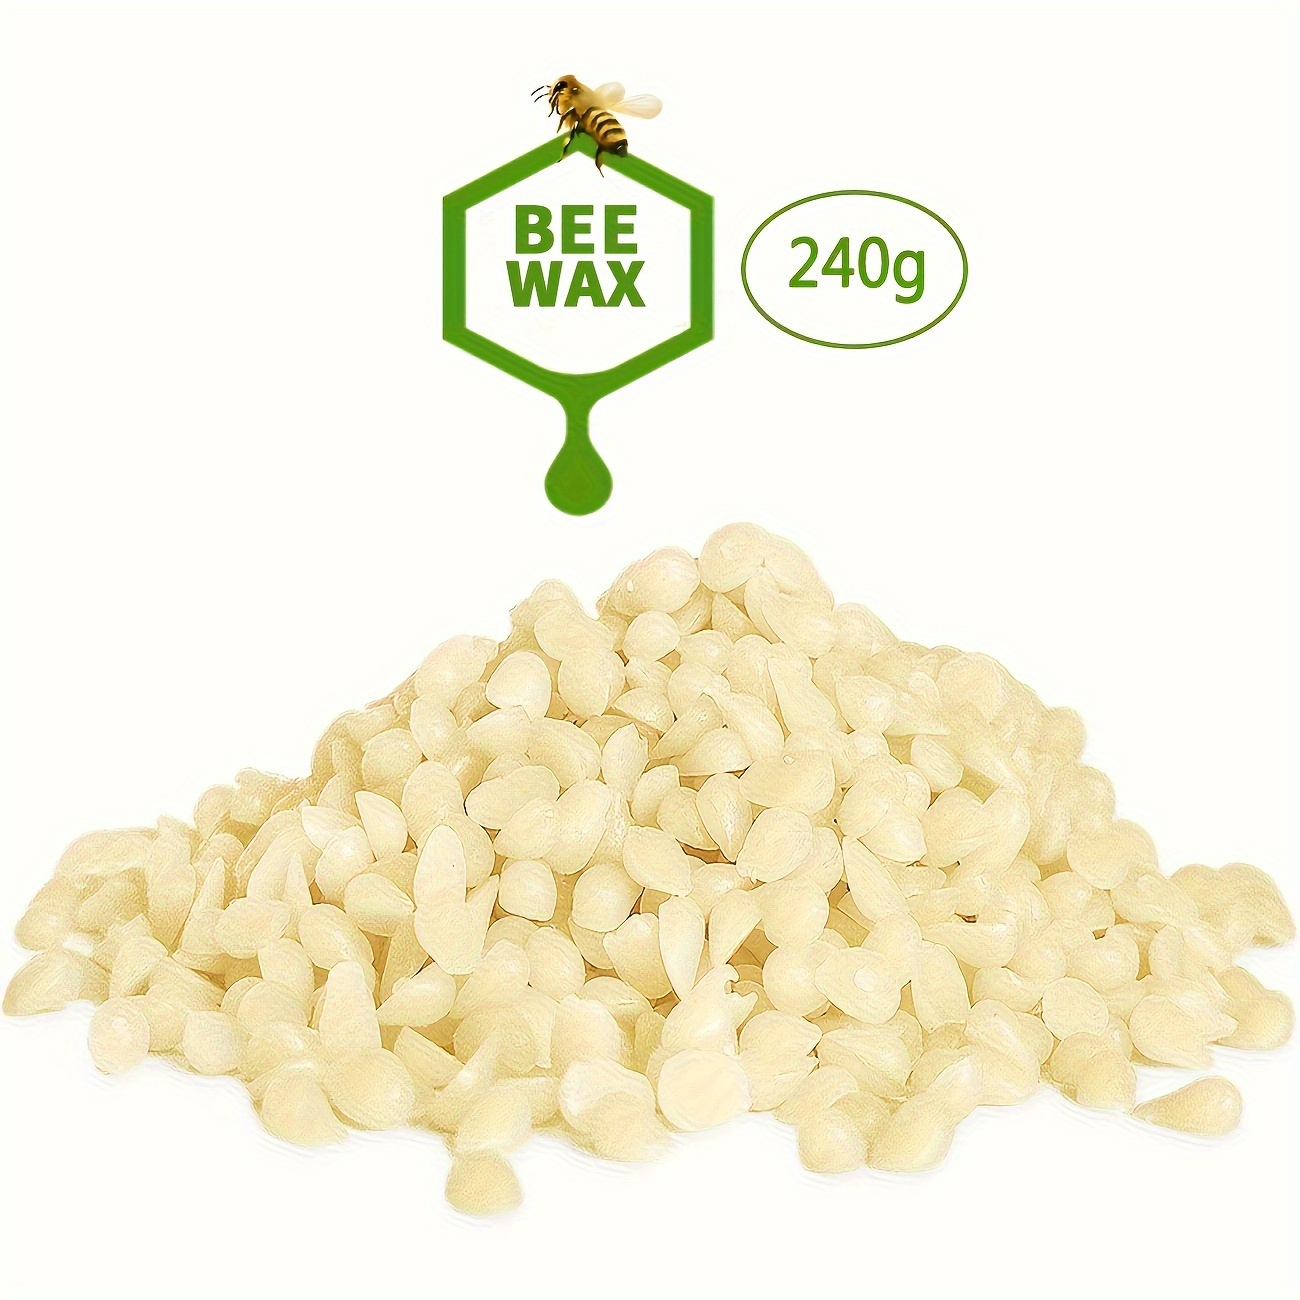 0.53LB/1.06LB White Organic Beeswax Granules- For DIY Candle Making,Soap,  Lip Balms, Lotions, Perfect For Aromatherapy Candles Making!